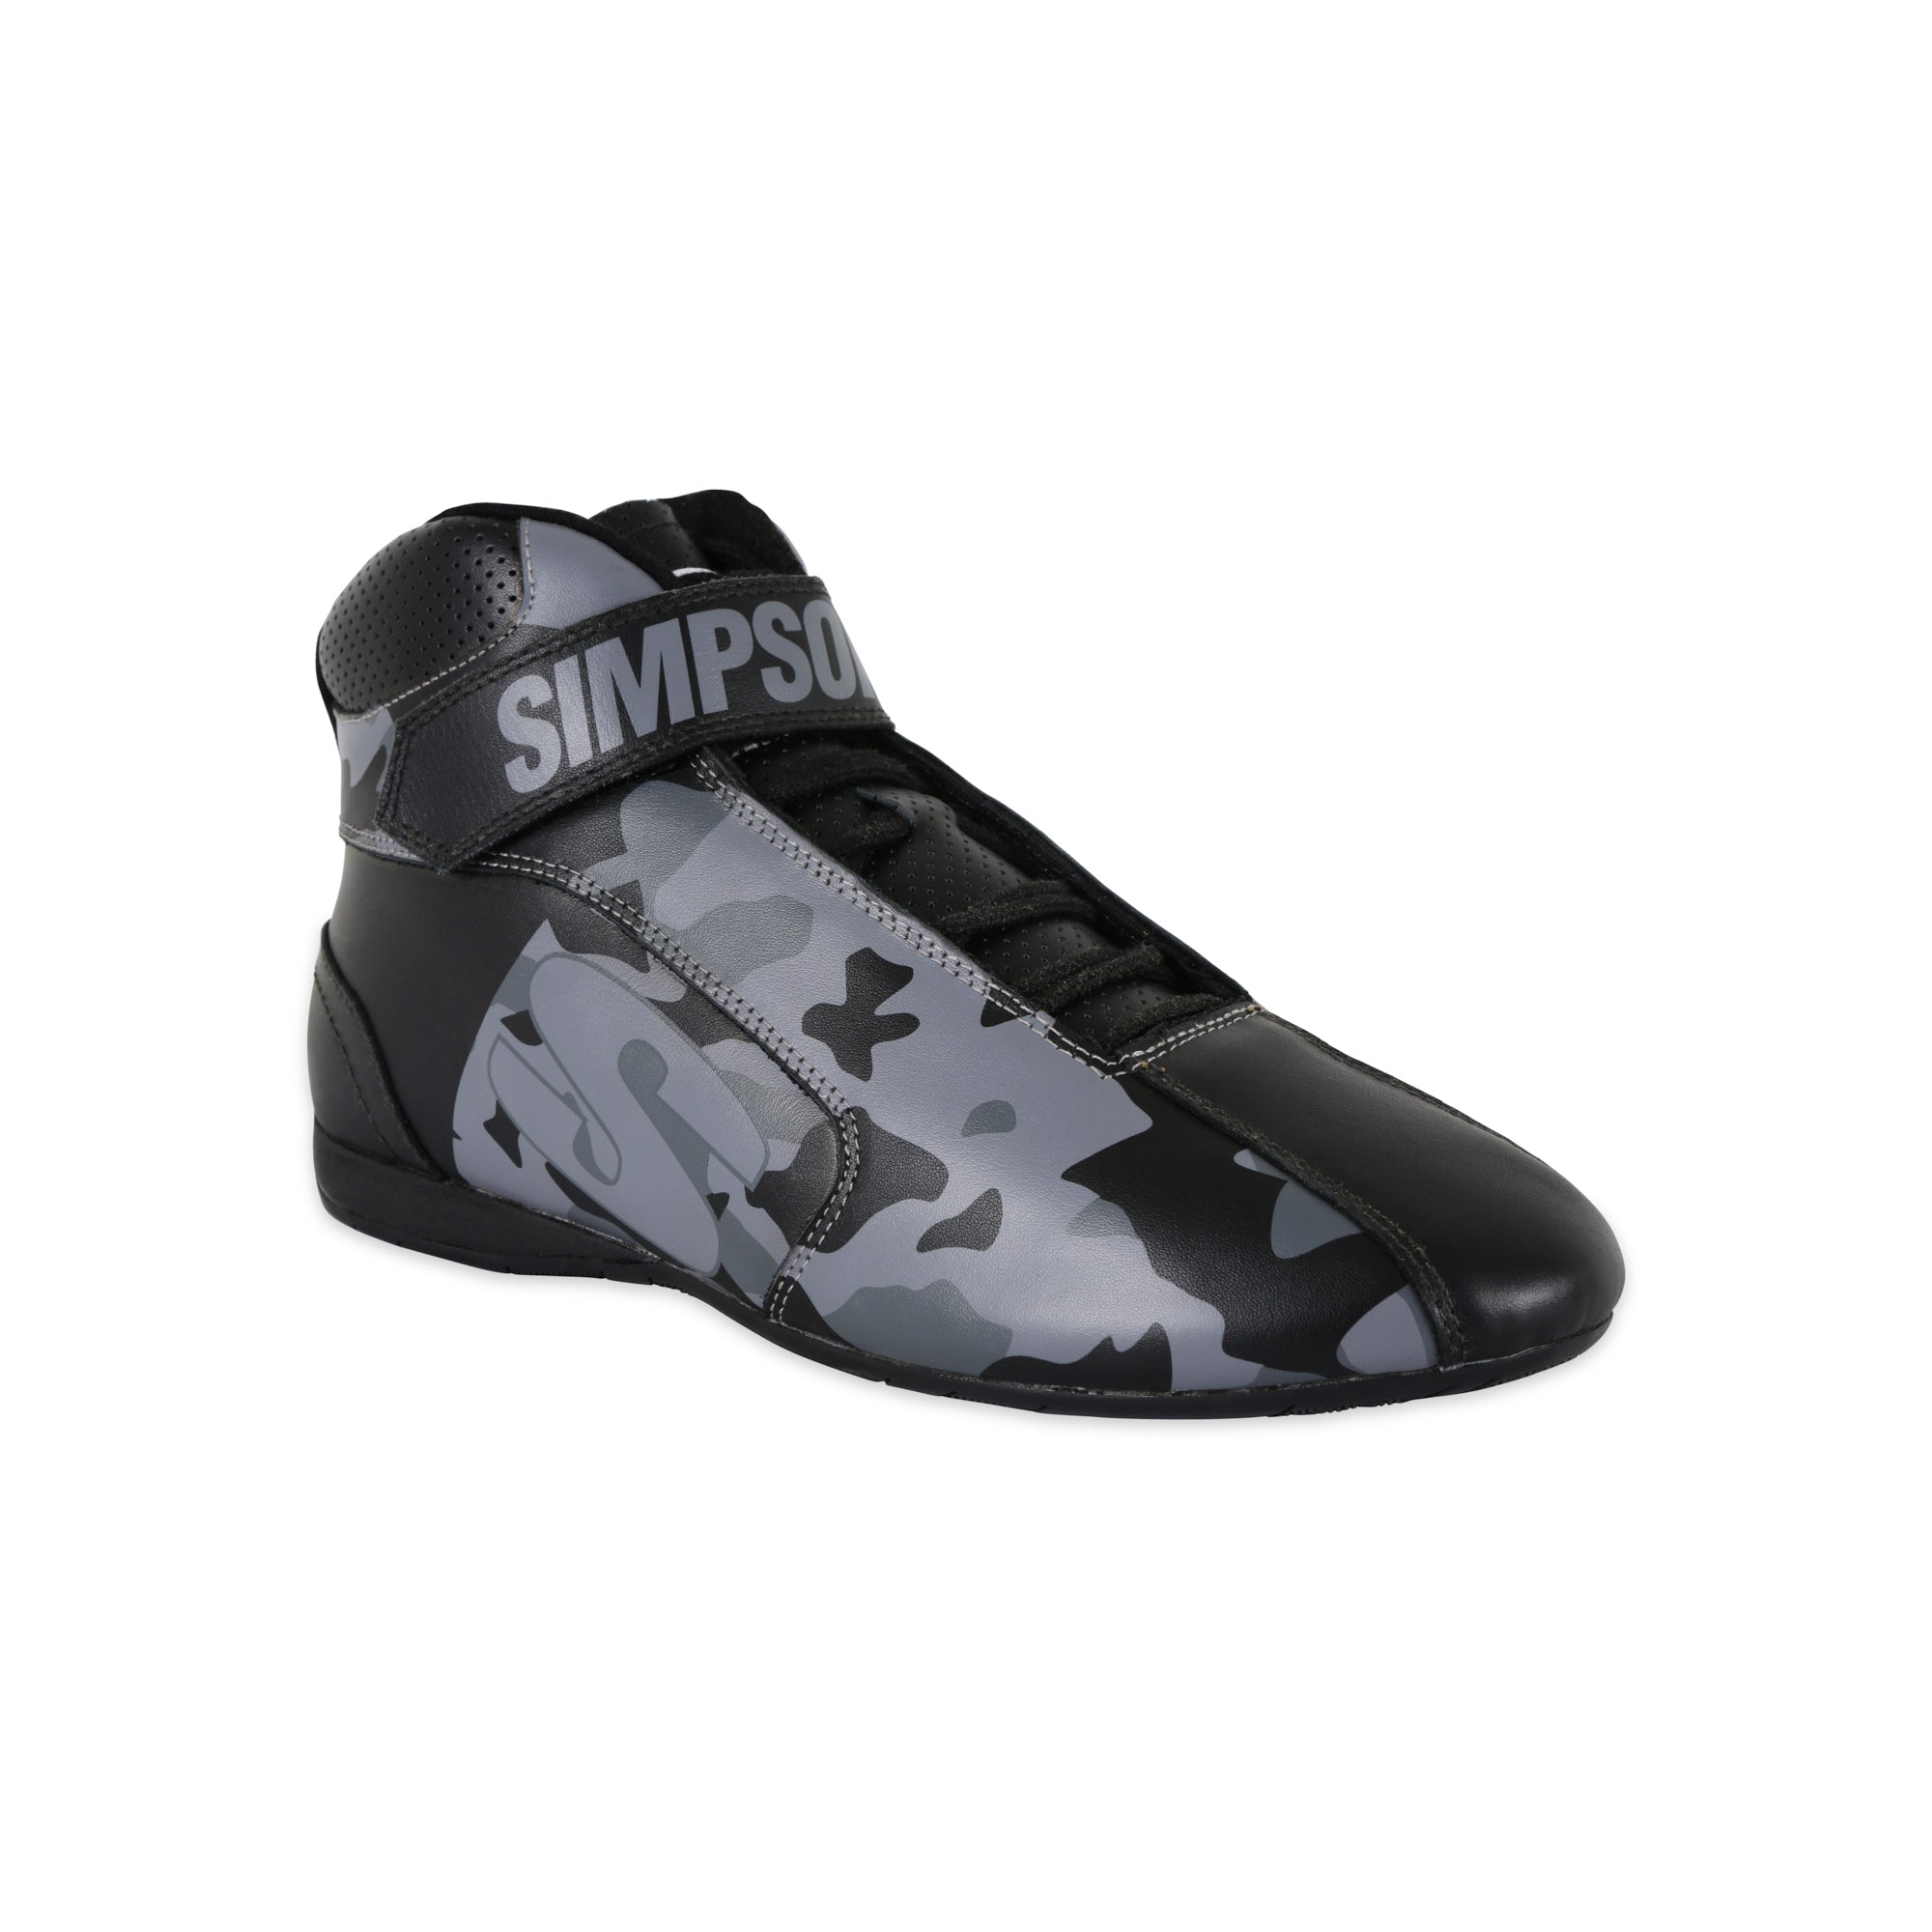 Simpson Shoe DNA X2 Blackout Size 9.5 Safety Clothing Driving Shoes and Boots main image